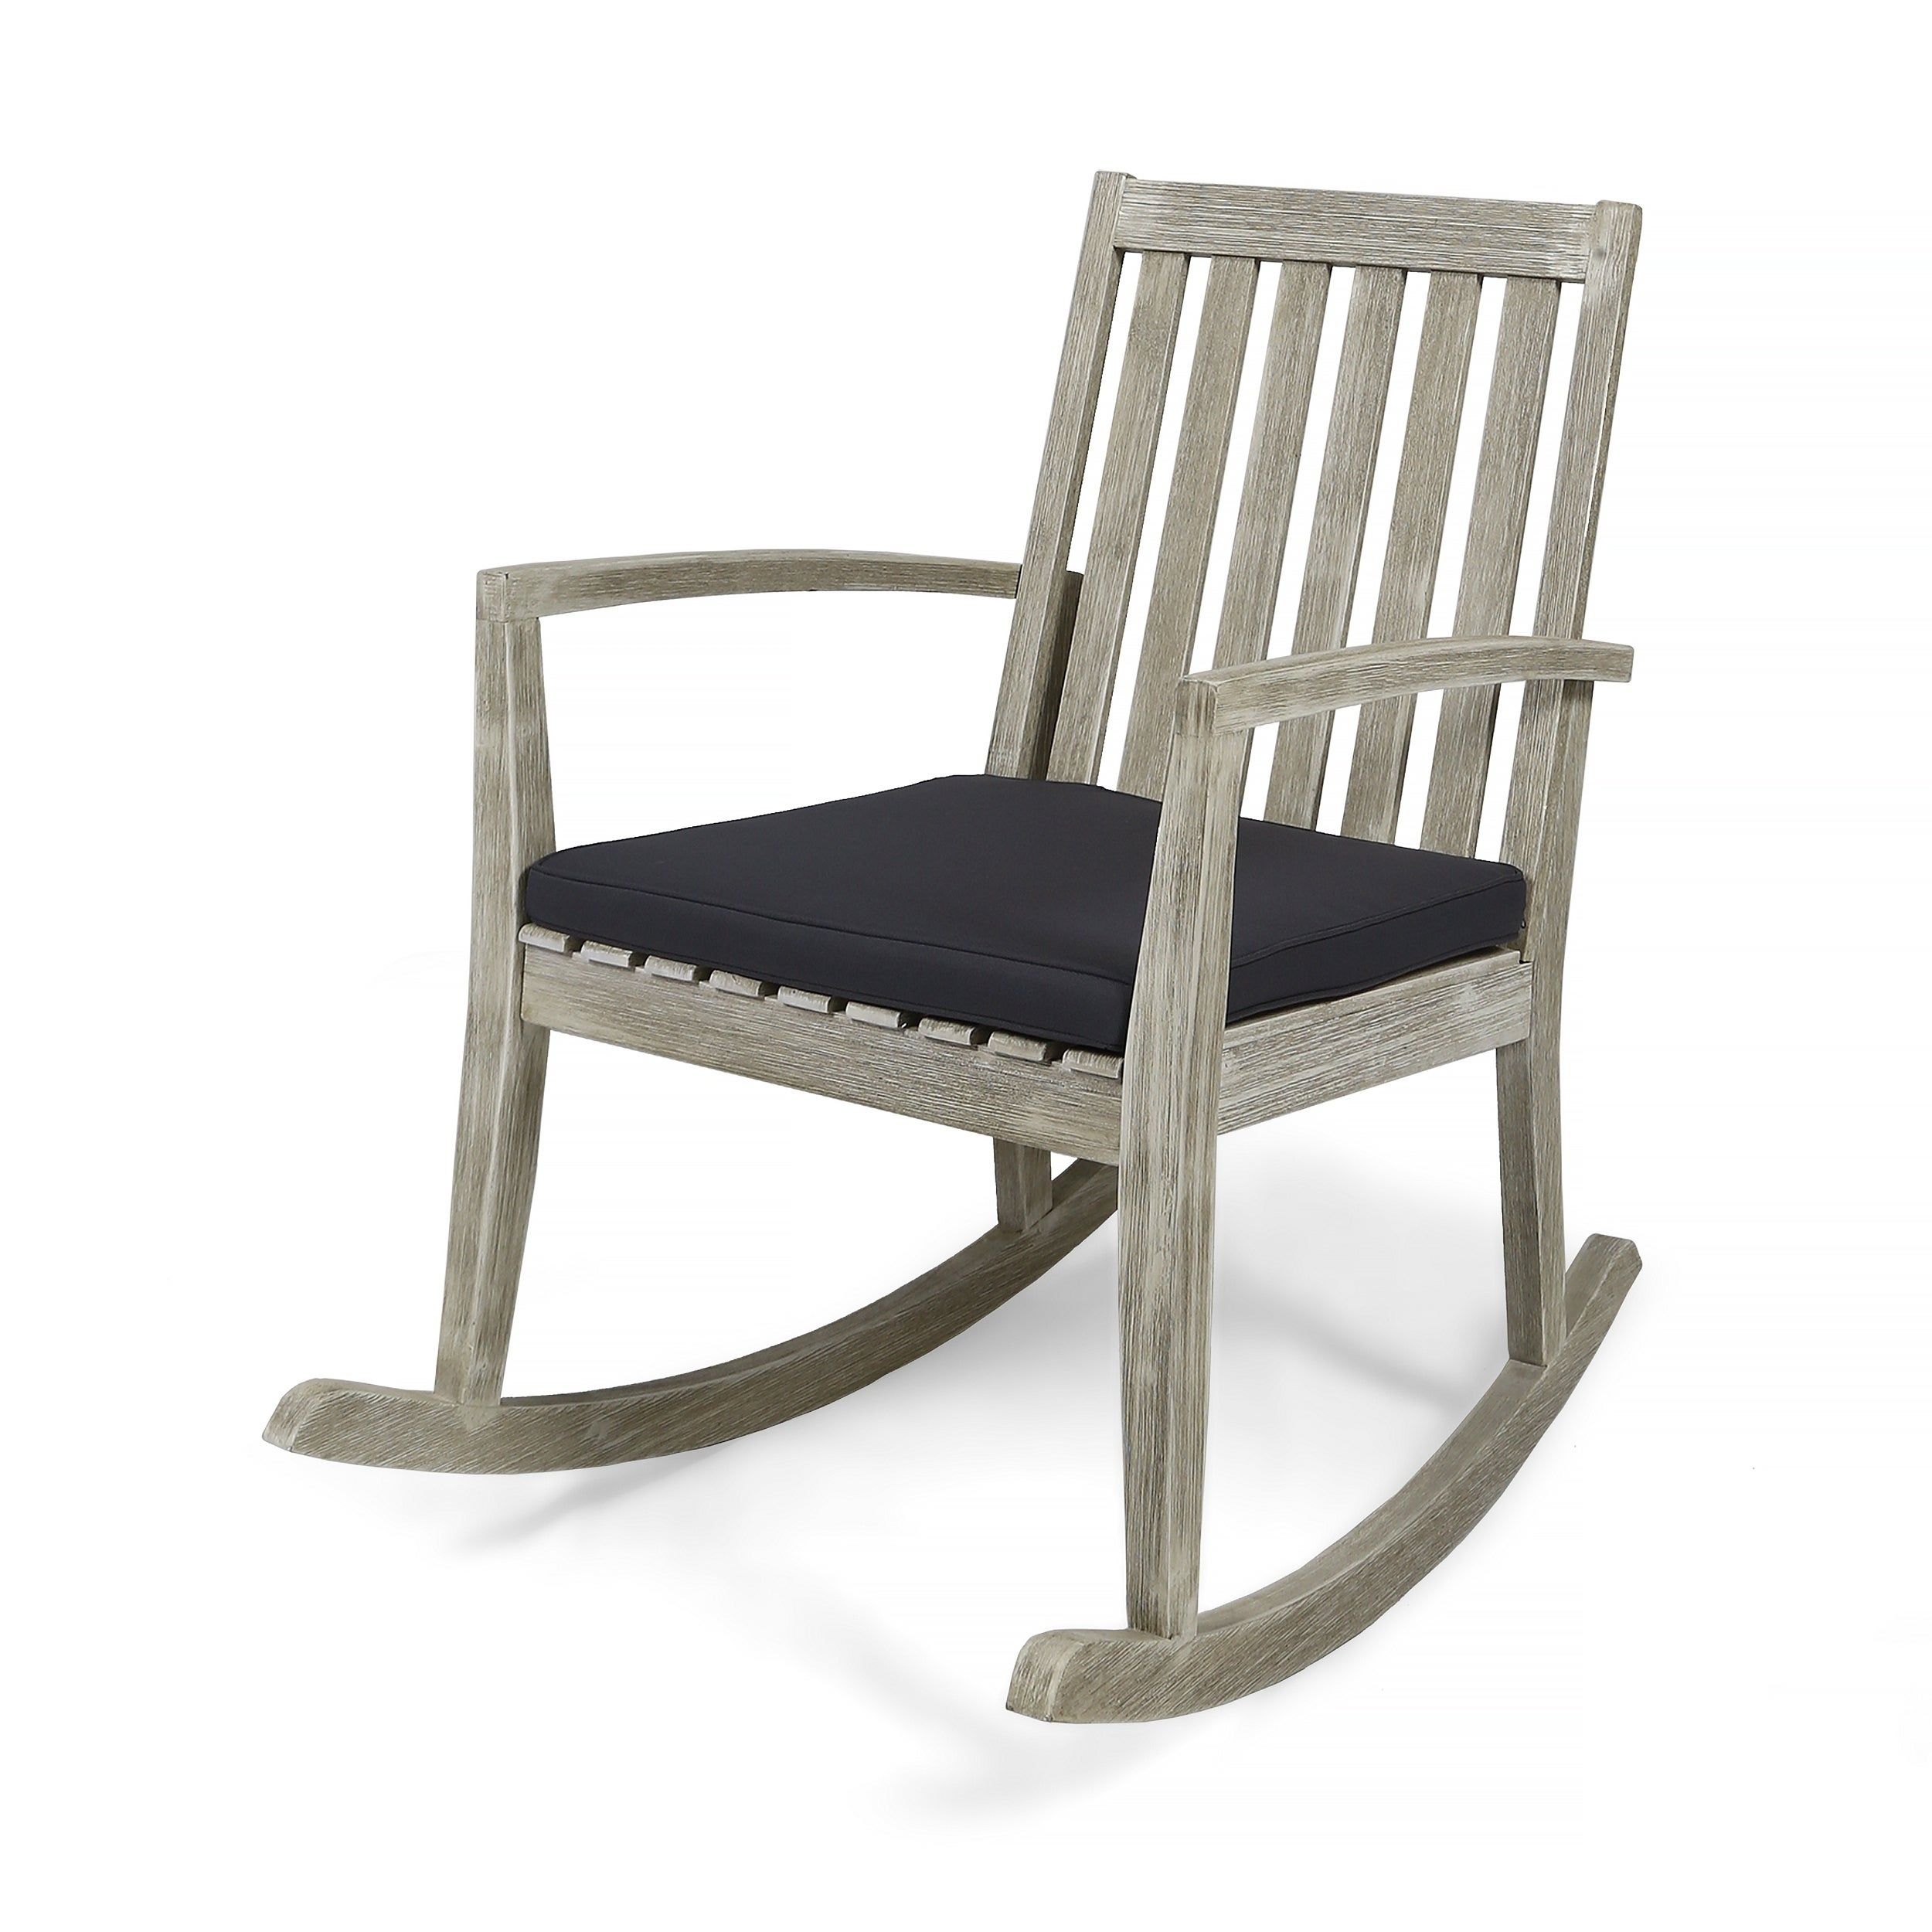 Buy Rocking Chairs, Traditional Living Room Chairs Online At Throughout Judson Traditional Rocking Chairs (Photo 2 of 20)